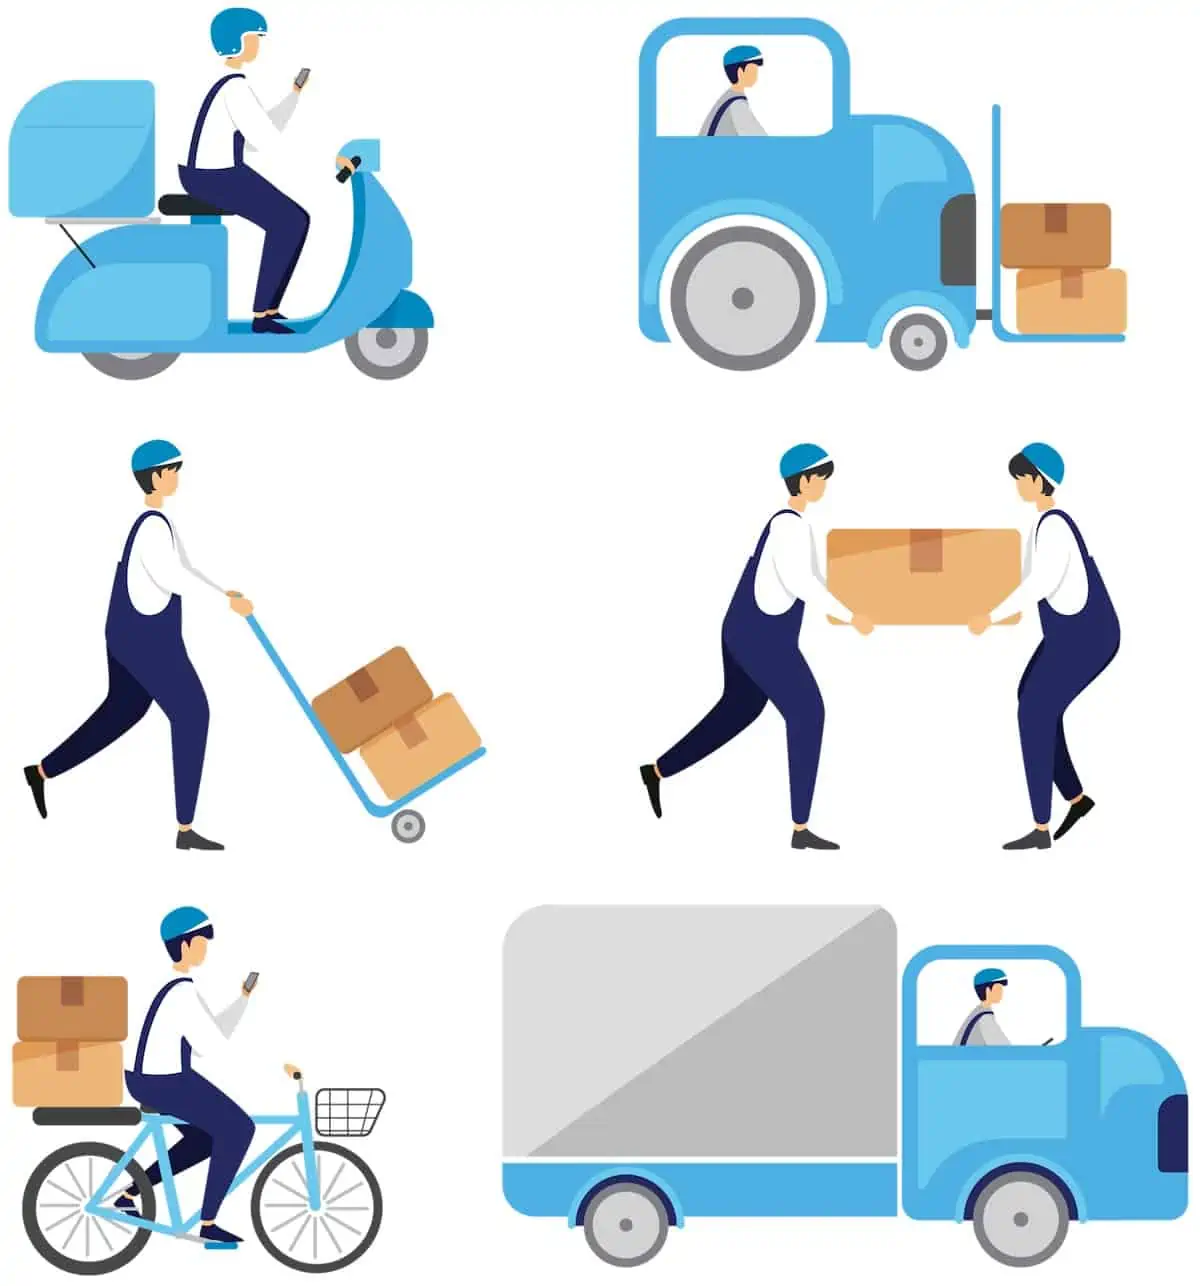 Retailer’s Guide to Delivering Phenomenal Delivery Experiences!